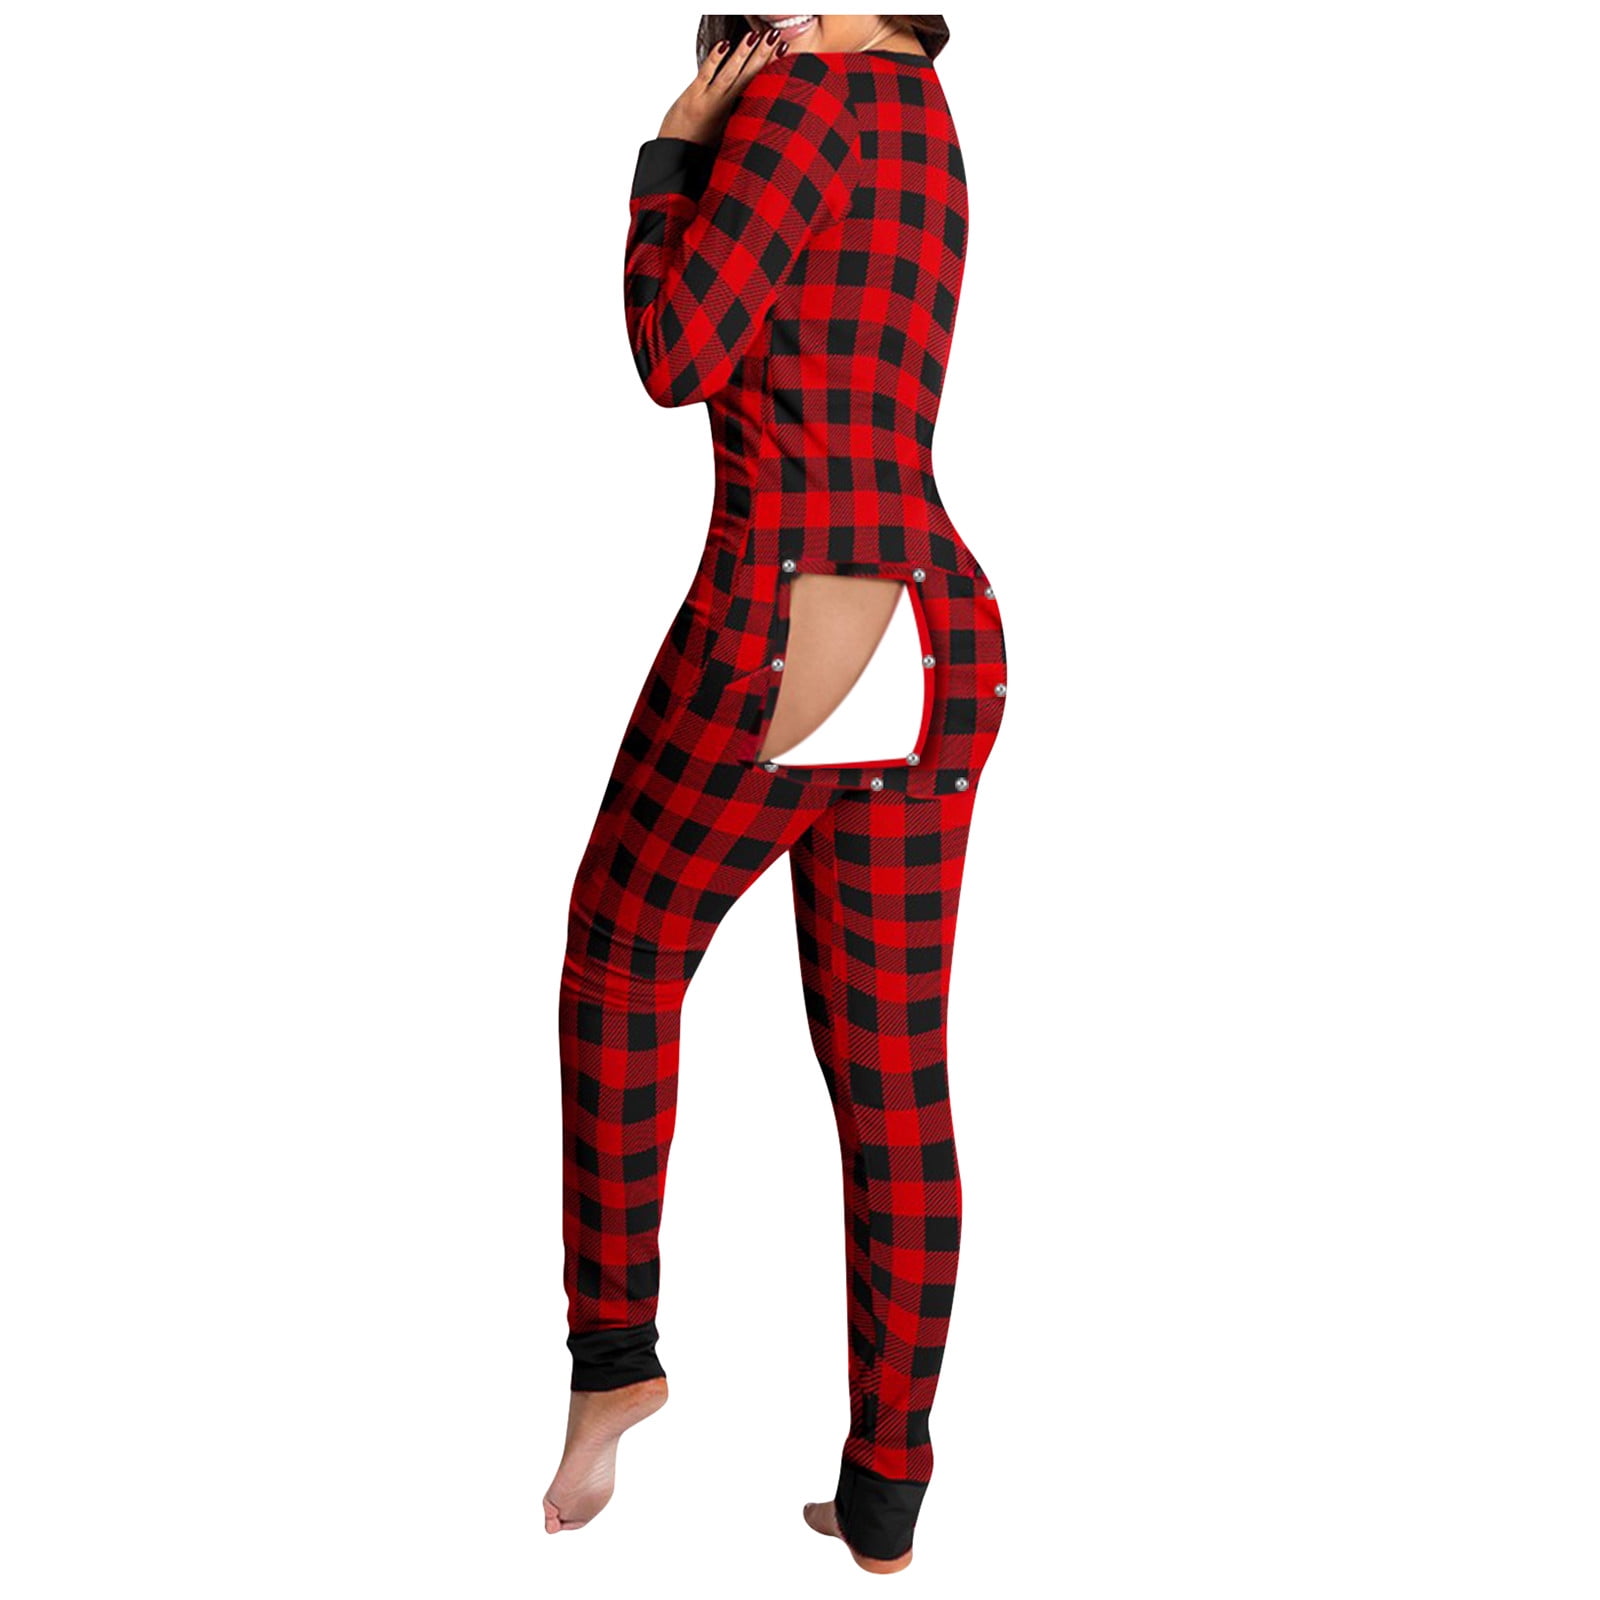 Sexy Women's Pajamas Onesies Women's Button-down Front Functional Buttoned  Flap Adults Jumpsuit V-neck Pajamas Femme Sleepwear